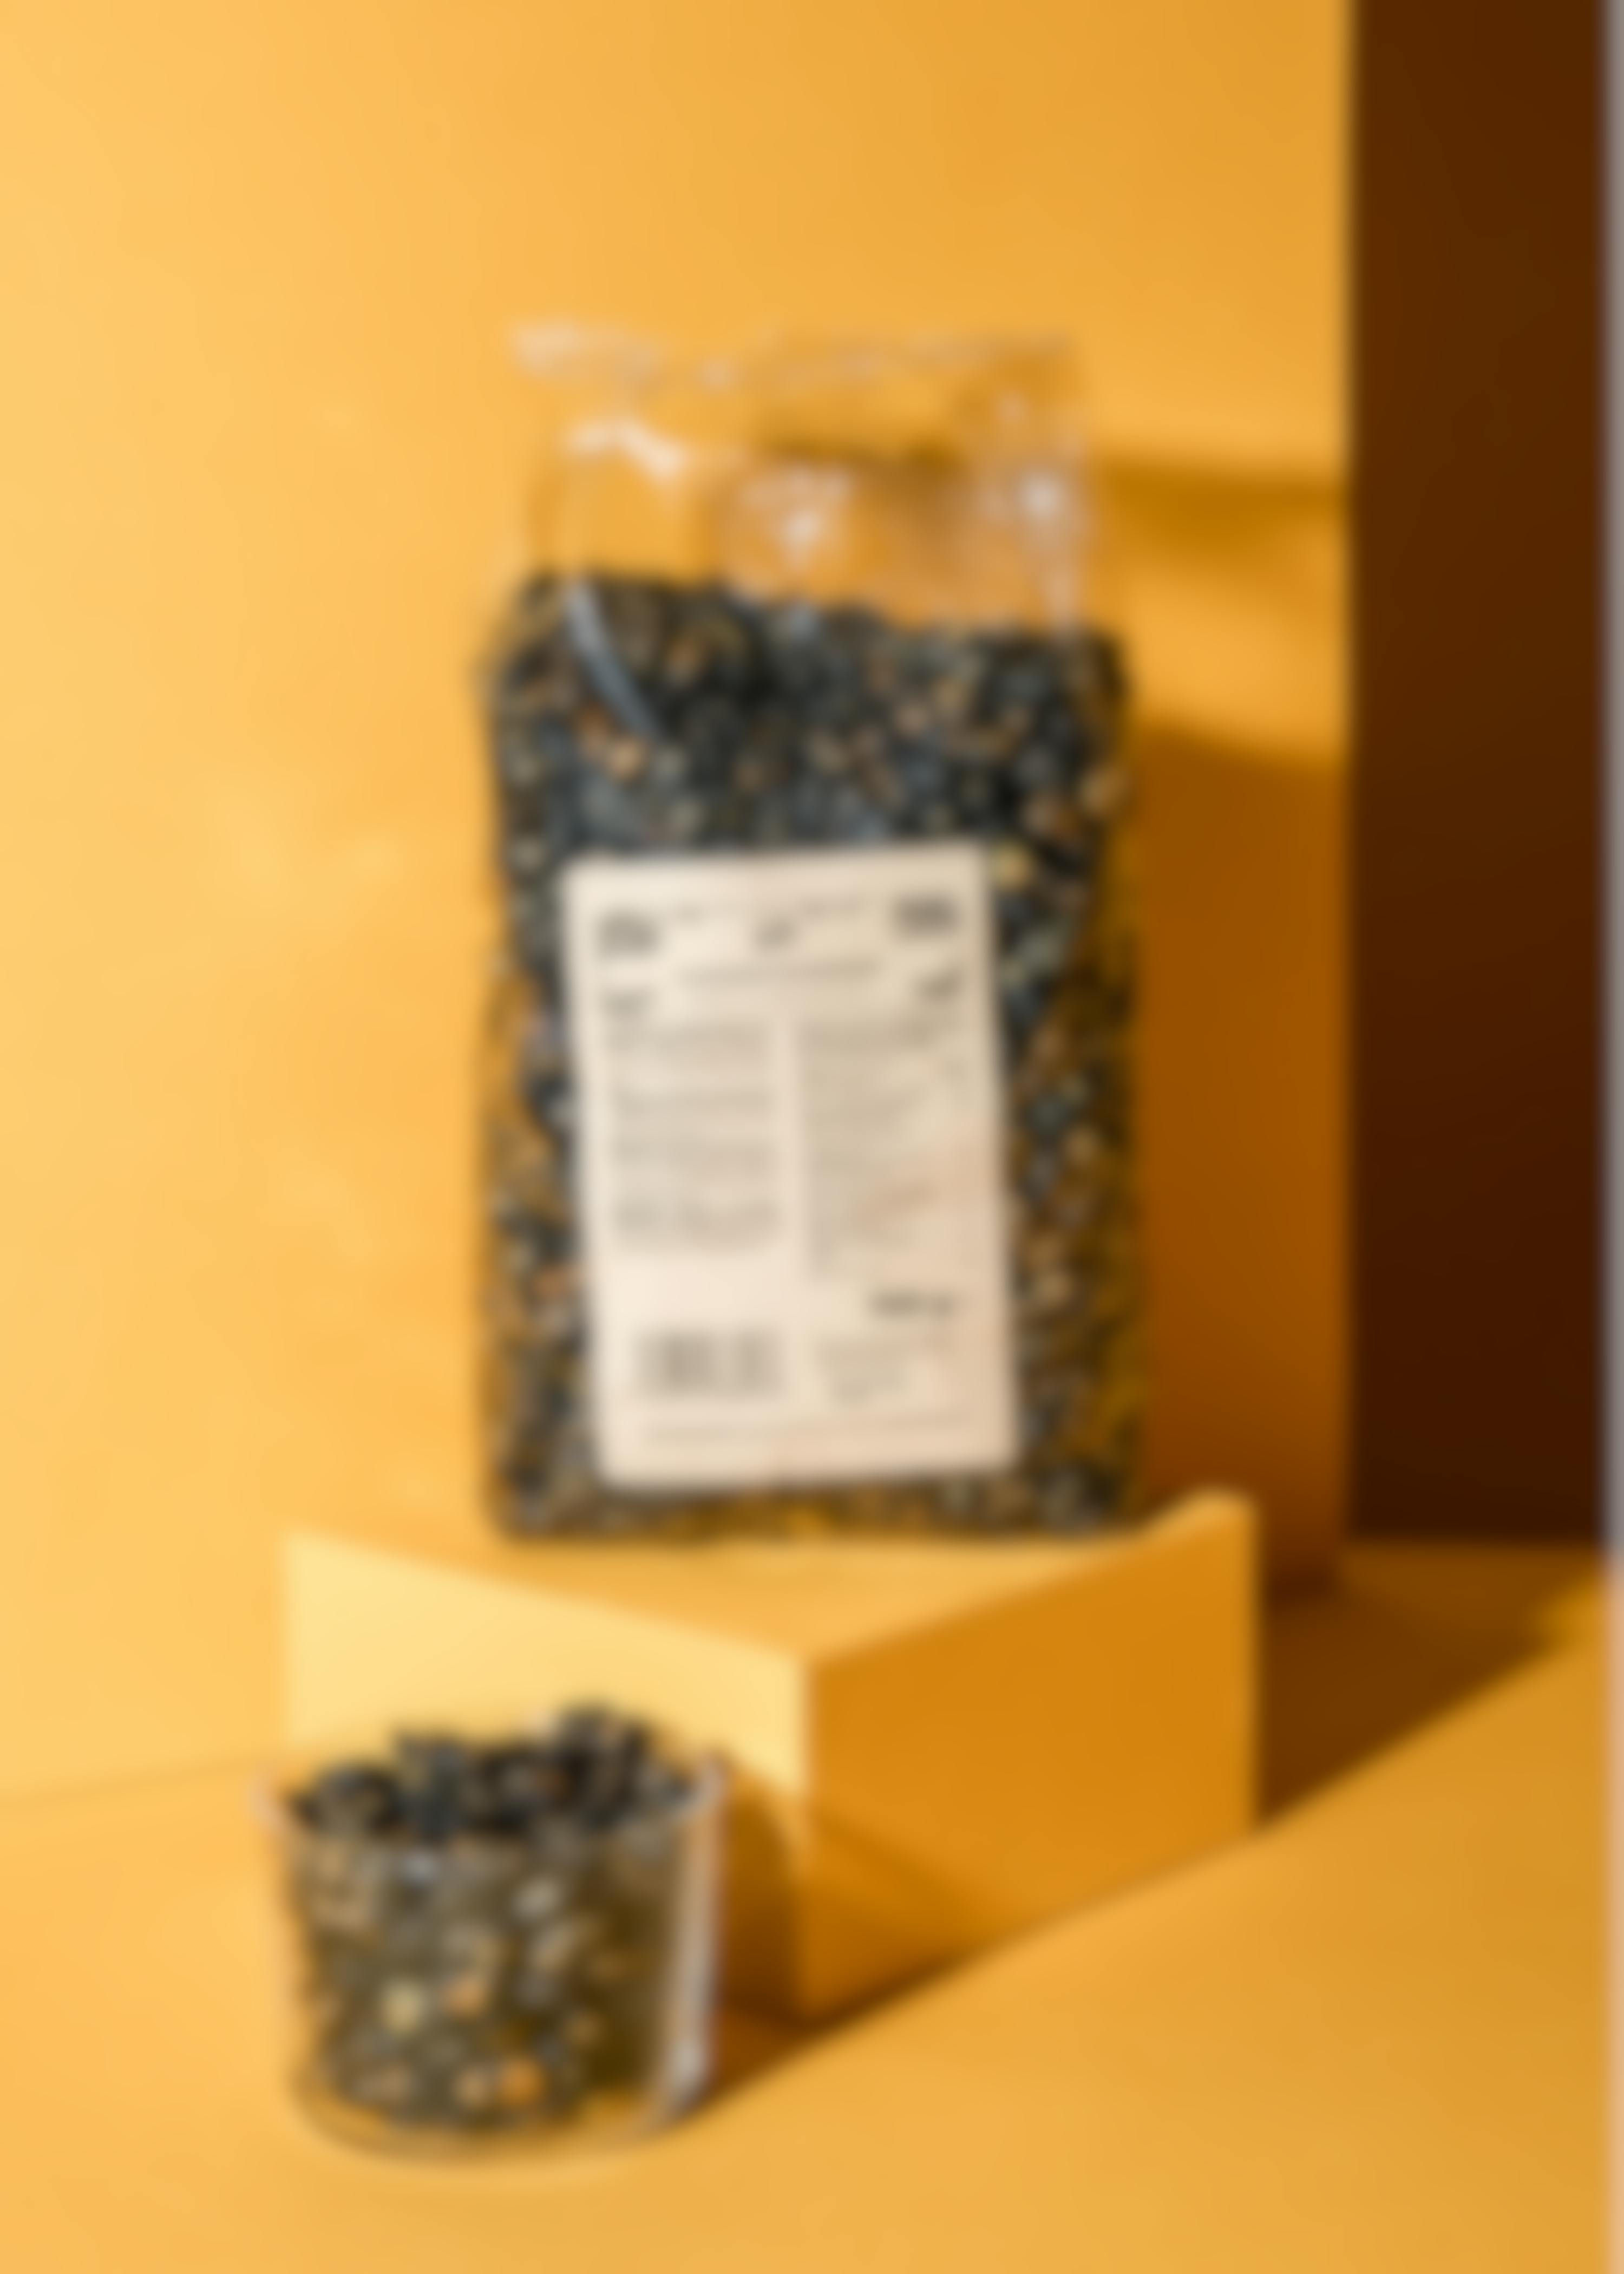 Roasted and salted black soya beans 750g